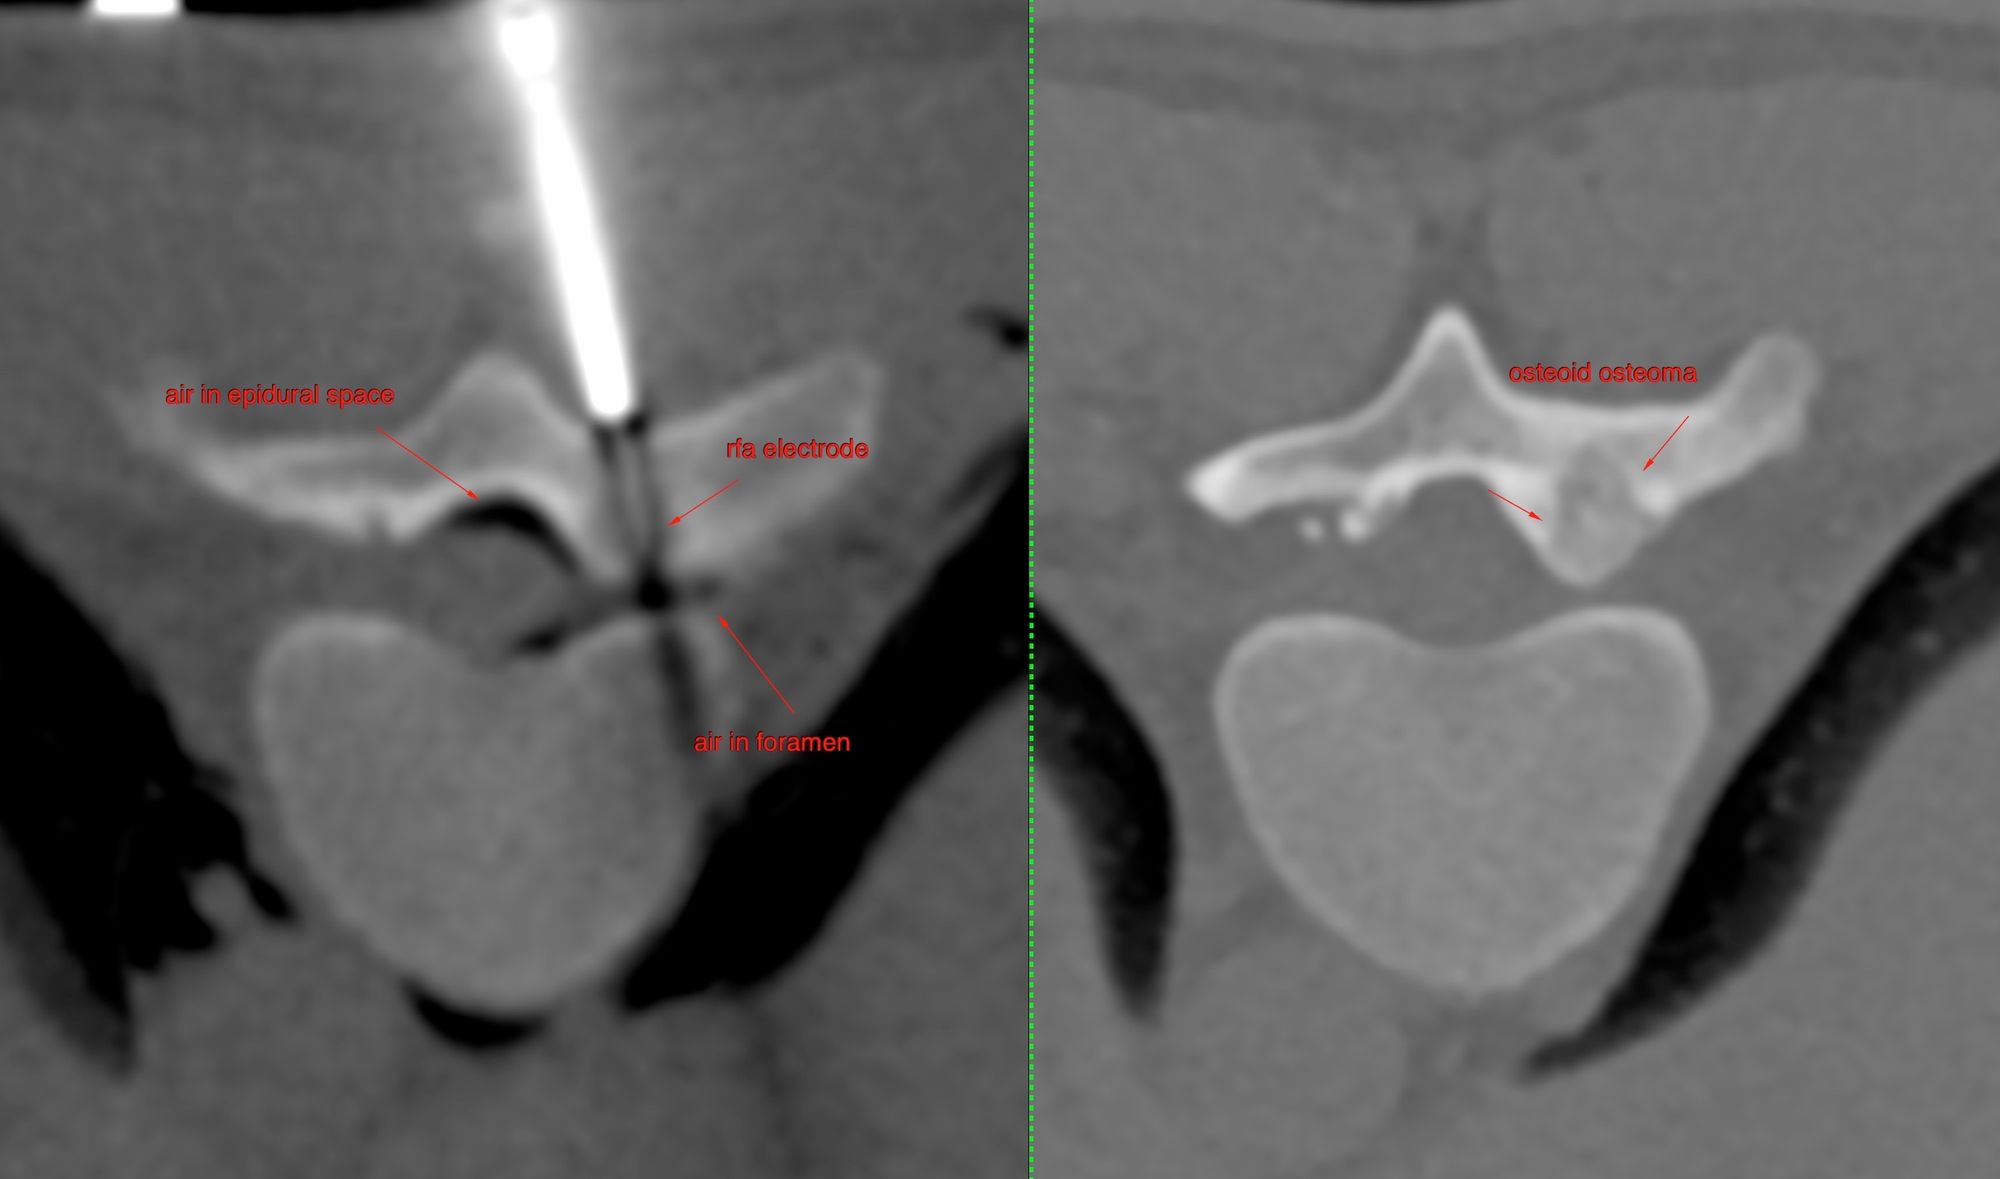 Case 40: Radiofrequency Ablation (RFA) of D10 Pars Osteoid Osteoma